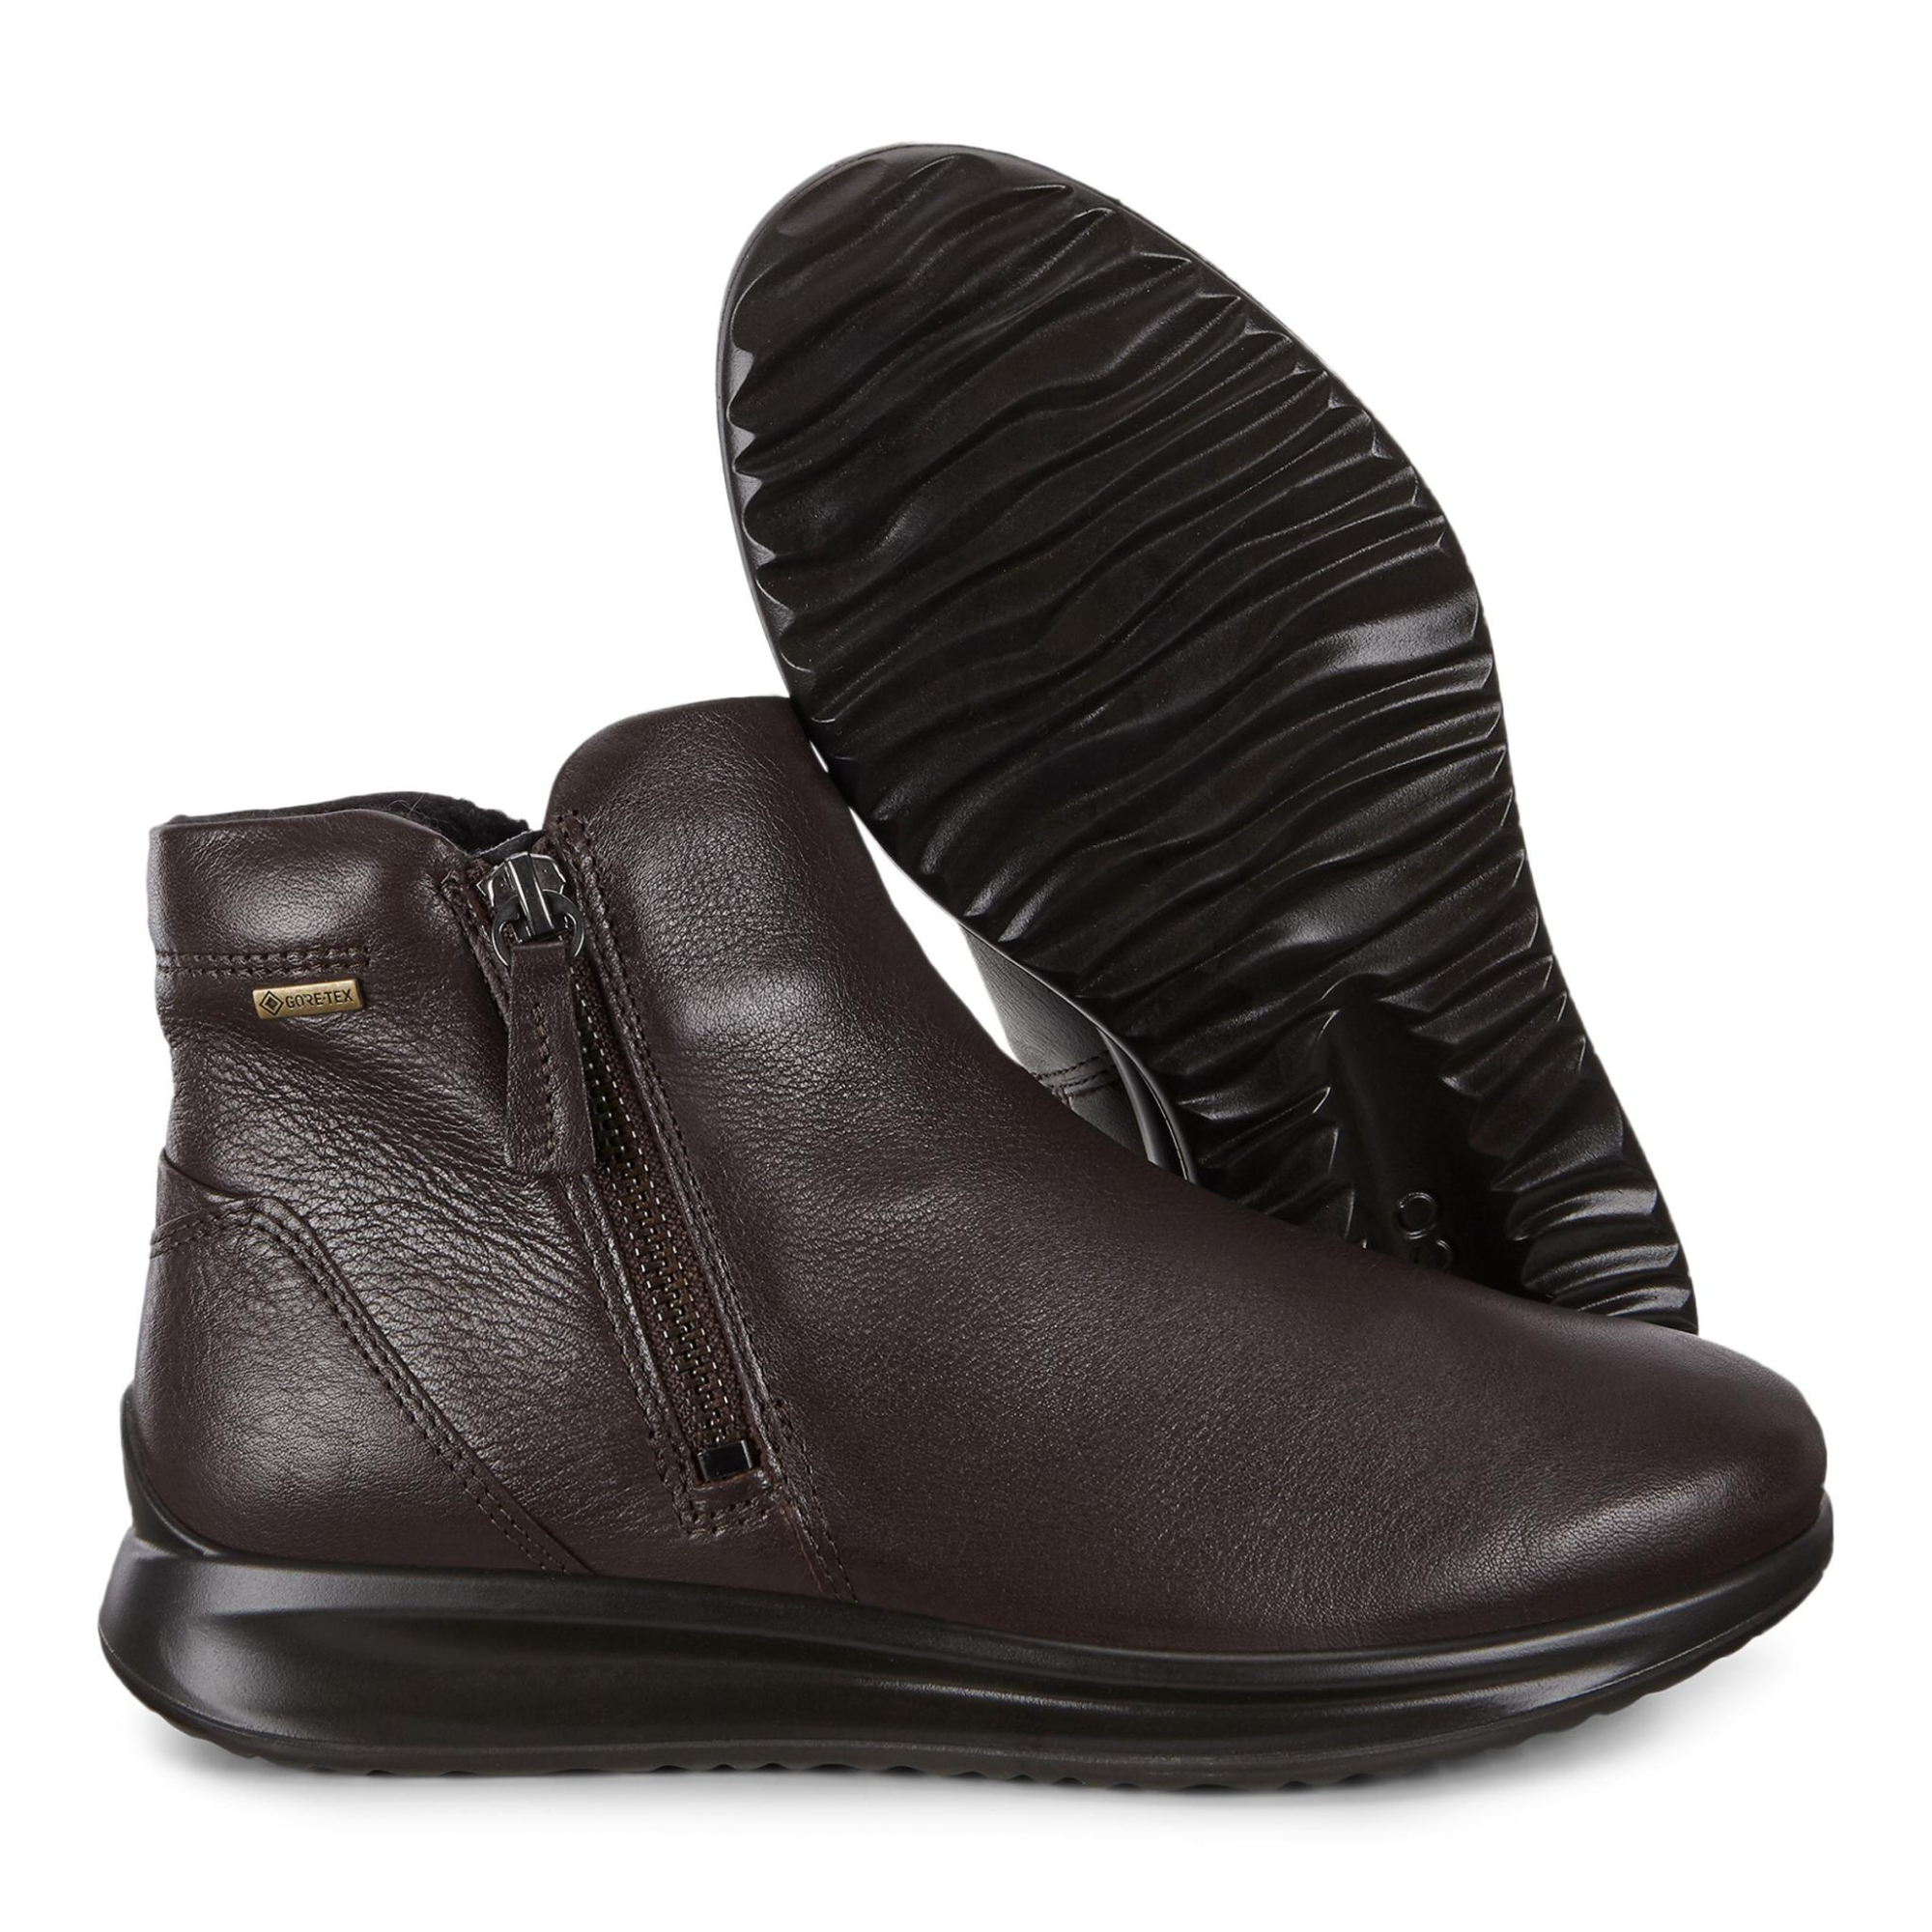 Ecco AQUET Ankle Boot 41 - - Veryk Mall - Veryk Mall, many product, quick response, safe your money!